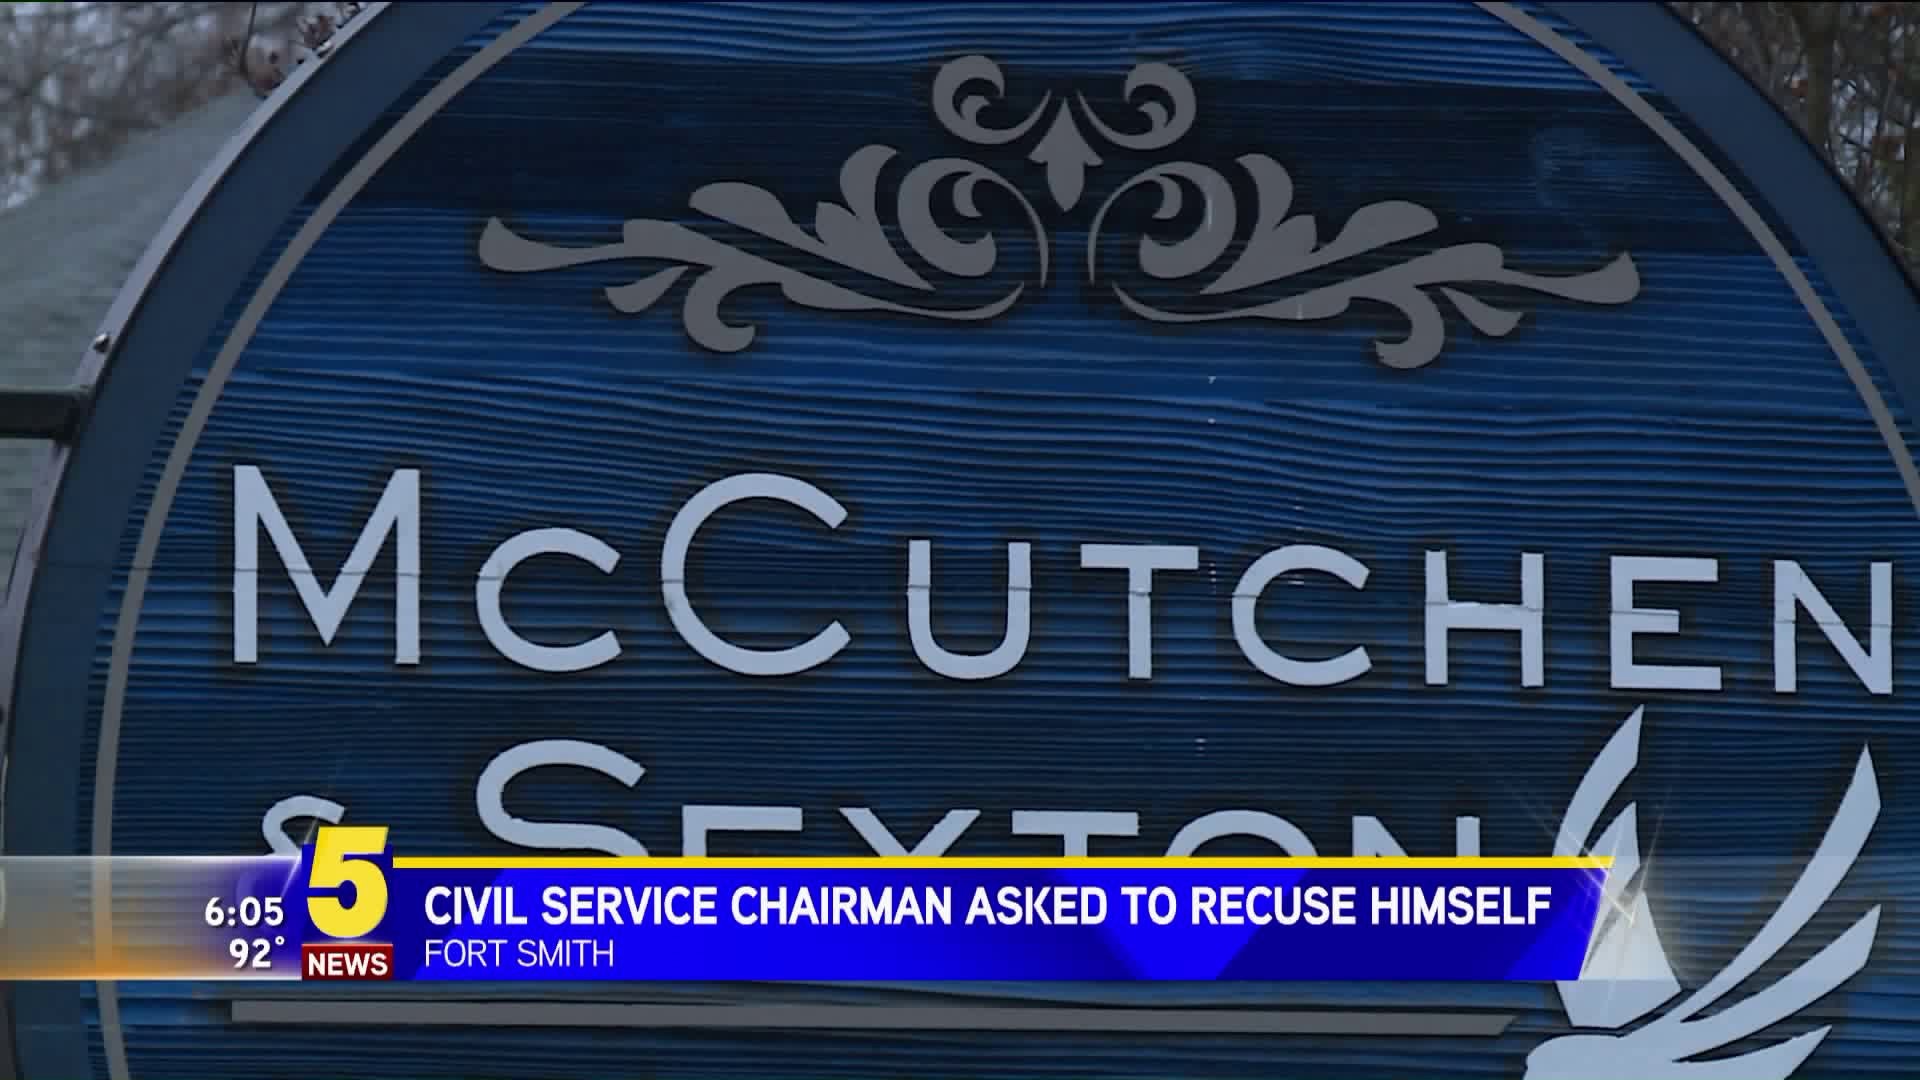 Civil Service Commission Asked To Recuse Himself